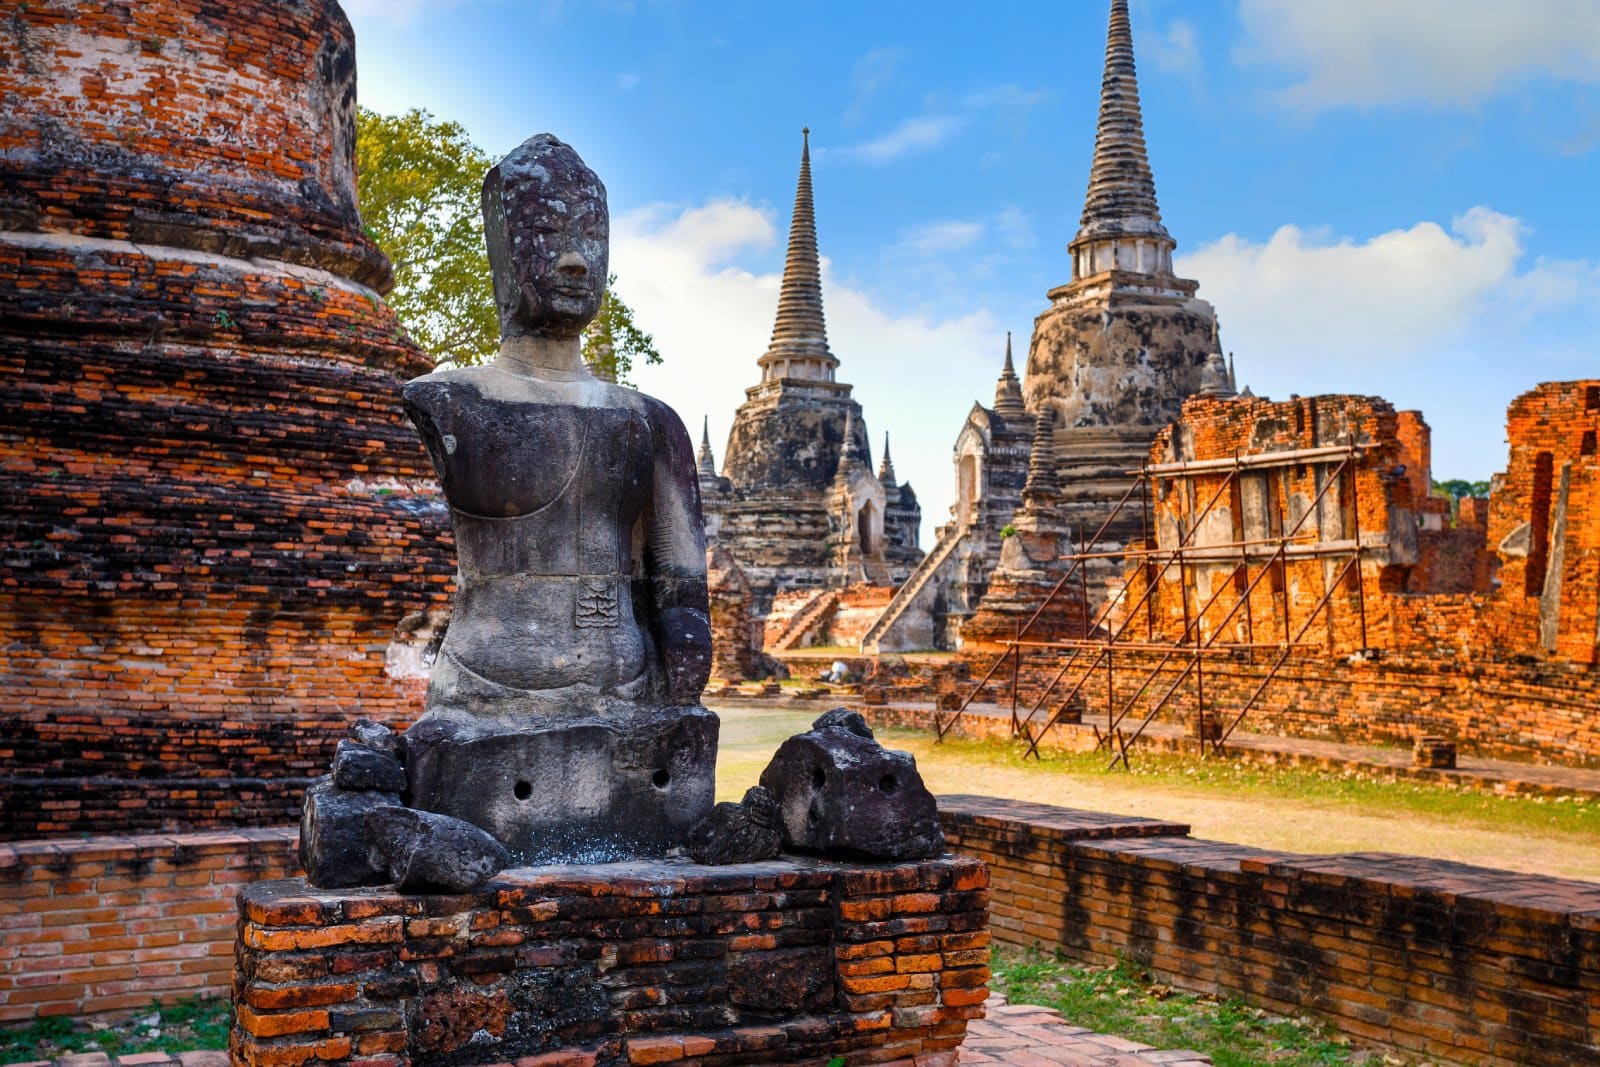 <p class="wp-caption-text">Image Credit: Shutterstock / cowardlion</p>  <p>Wat Ratchaburana and Wat Phra Si Sanphet stand as Ayutthaya’s architectural and historical highlights, each offering insights into the city’s rich past. Wat Ratchaburana, known for its well-preserved structure and Buddhist art from the 15th century, features a central prang and crypts with ancient frescoes and relics. Next door, Wat Phra Si Sanphet, notable for its three large chedis housing royal ashes, played a crucial role in royal ceremonies. These temples together showcase Ayutthaya’s architectural brilliance and spiritual heritage, contrasting Wat Ratchaburana’s detailed artistry with Wat Phra Si Sanphet’s ceremonial grandeur, reflecting the city’s complex history and its significance as a historical site.</p>